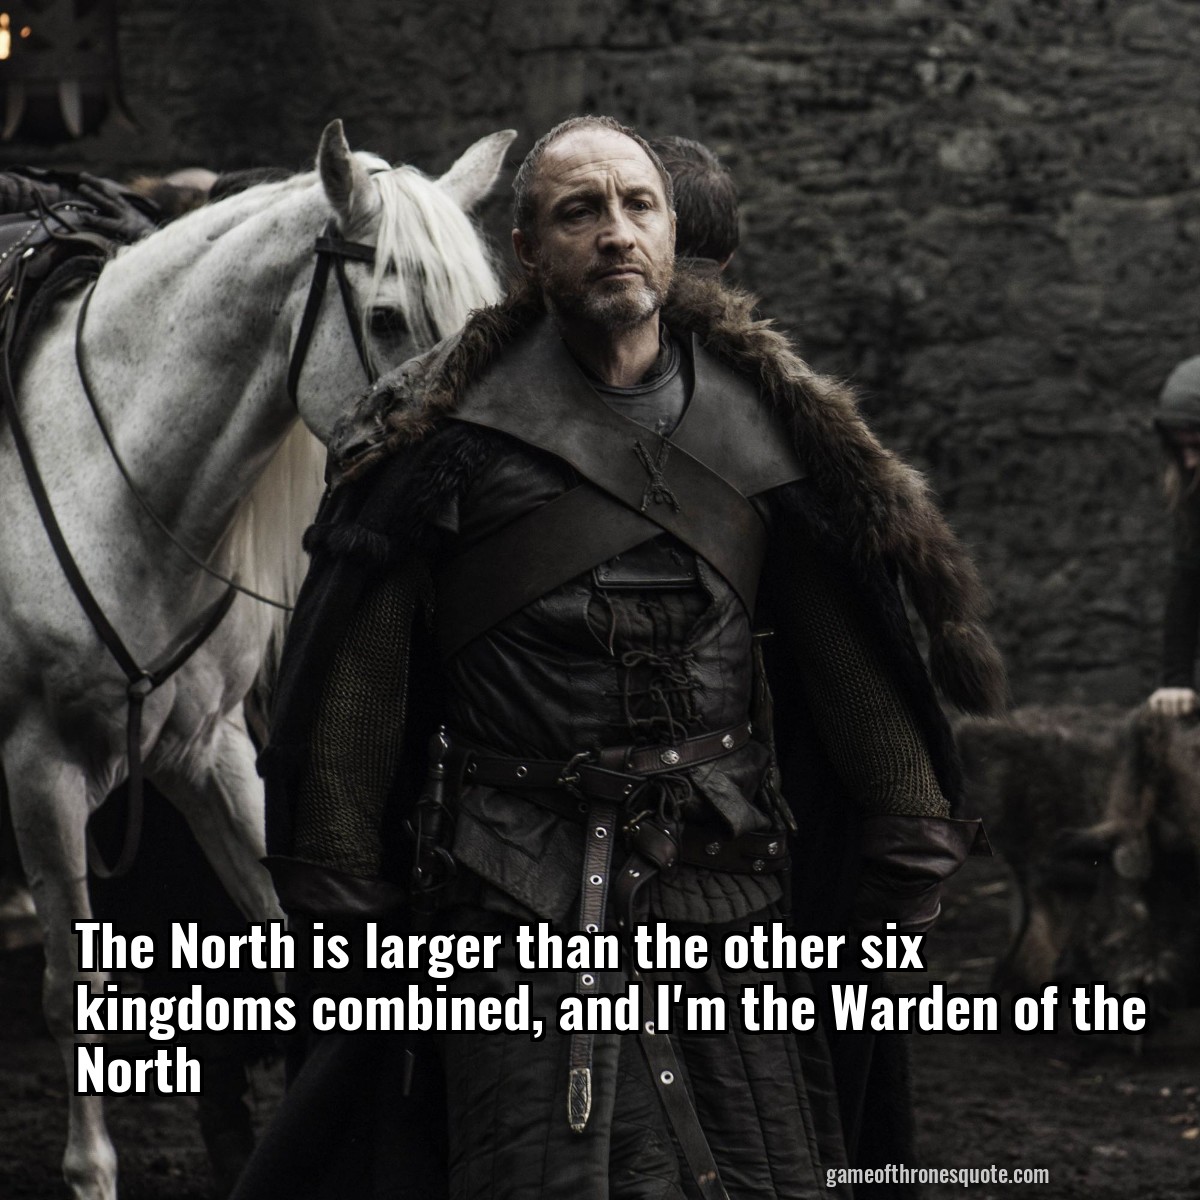 The North is larger than the other six kingdoms combined, and I'm the Warden of the North